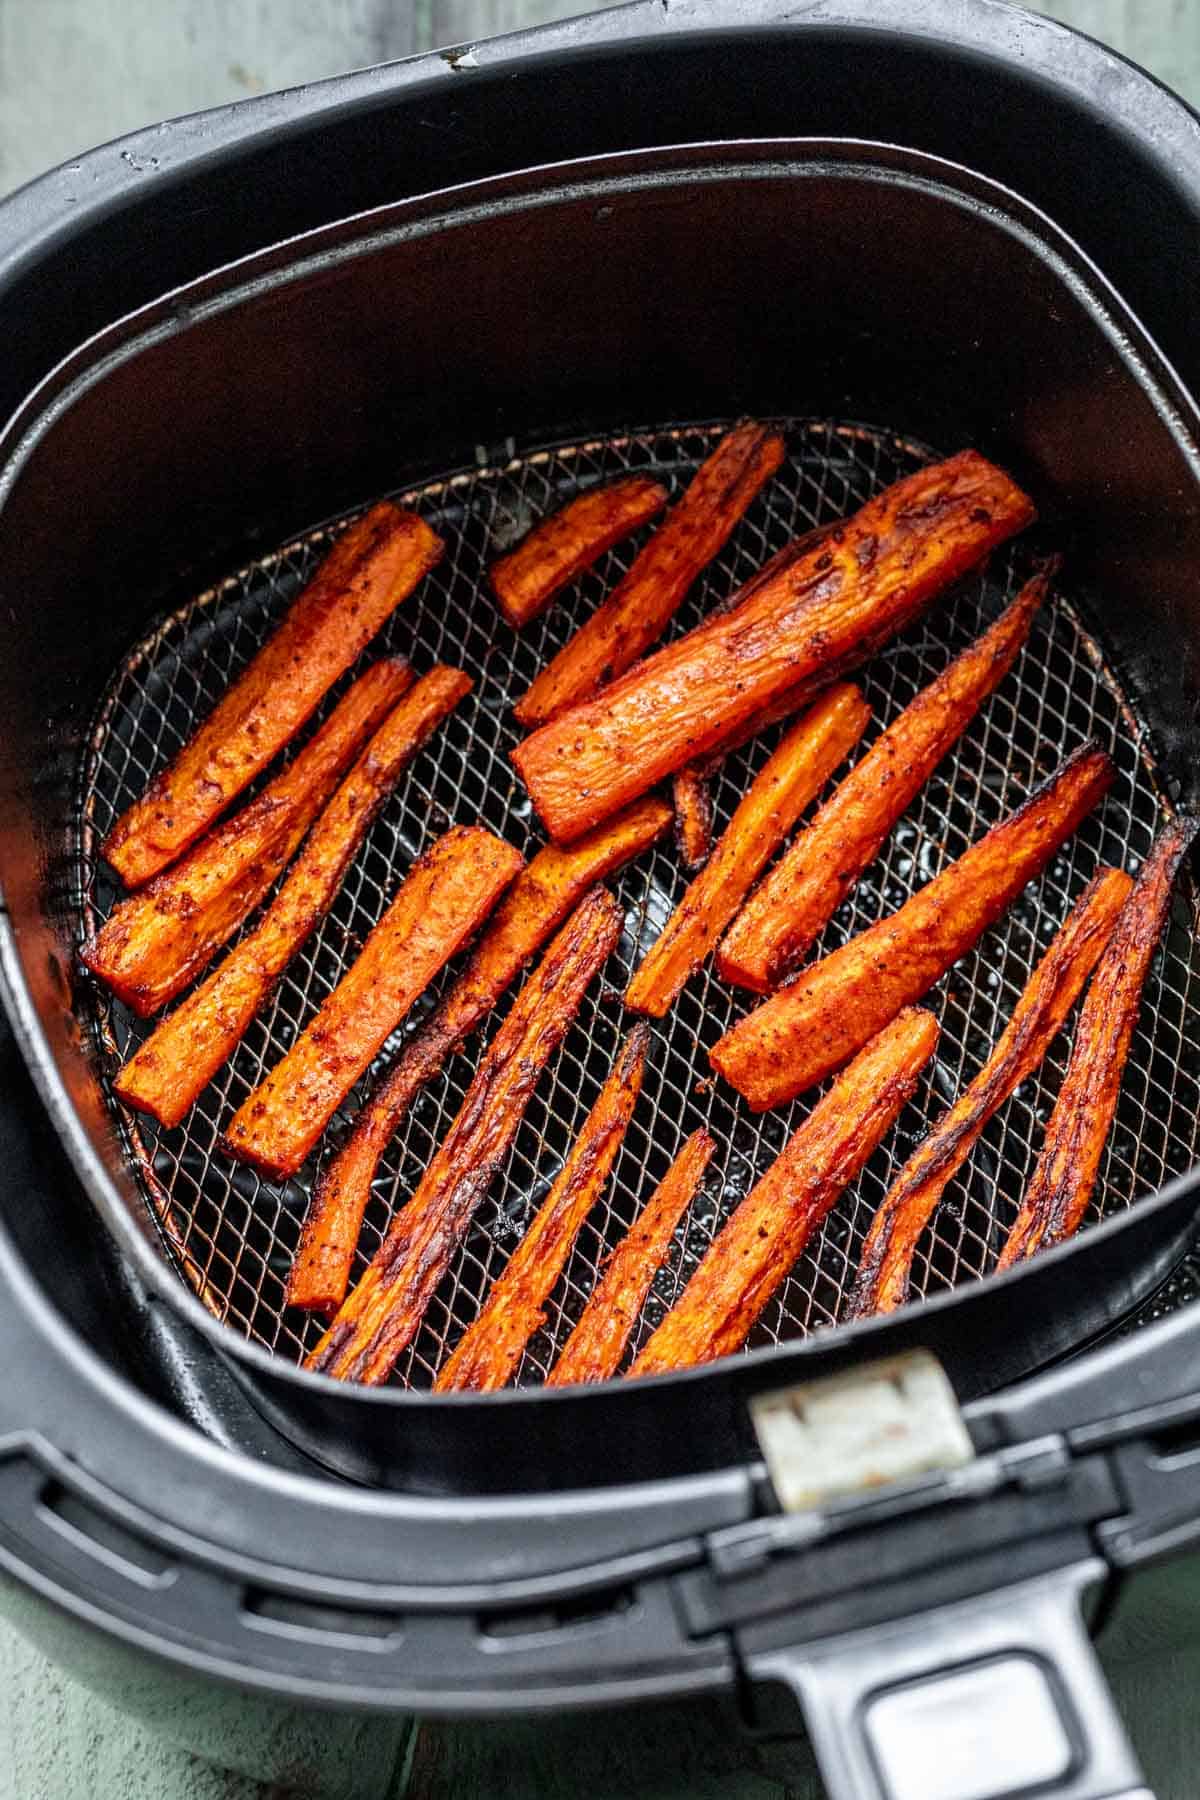 Cooked carrots in an air fryer basket.